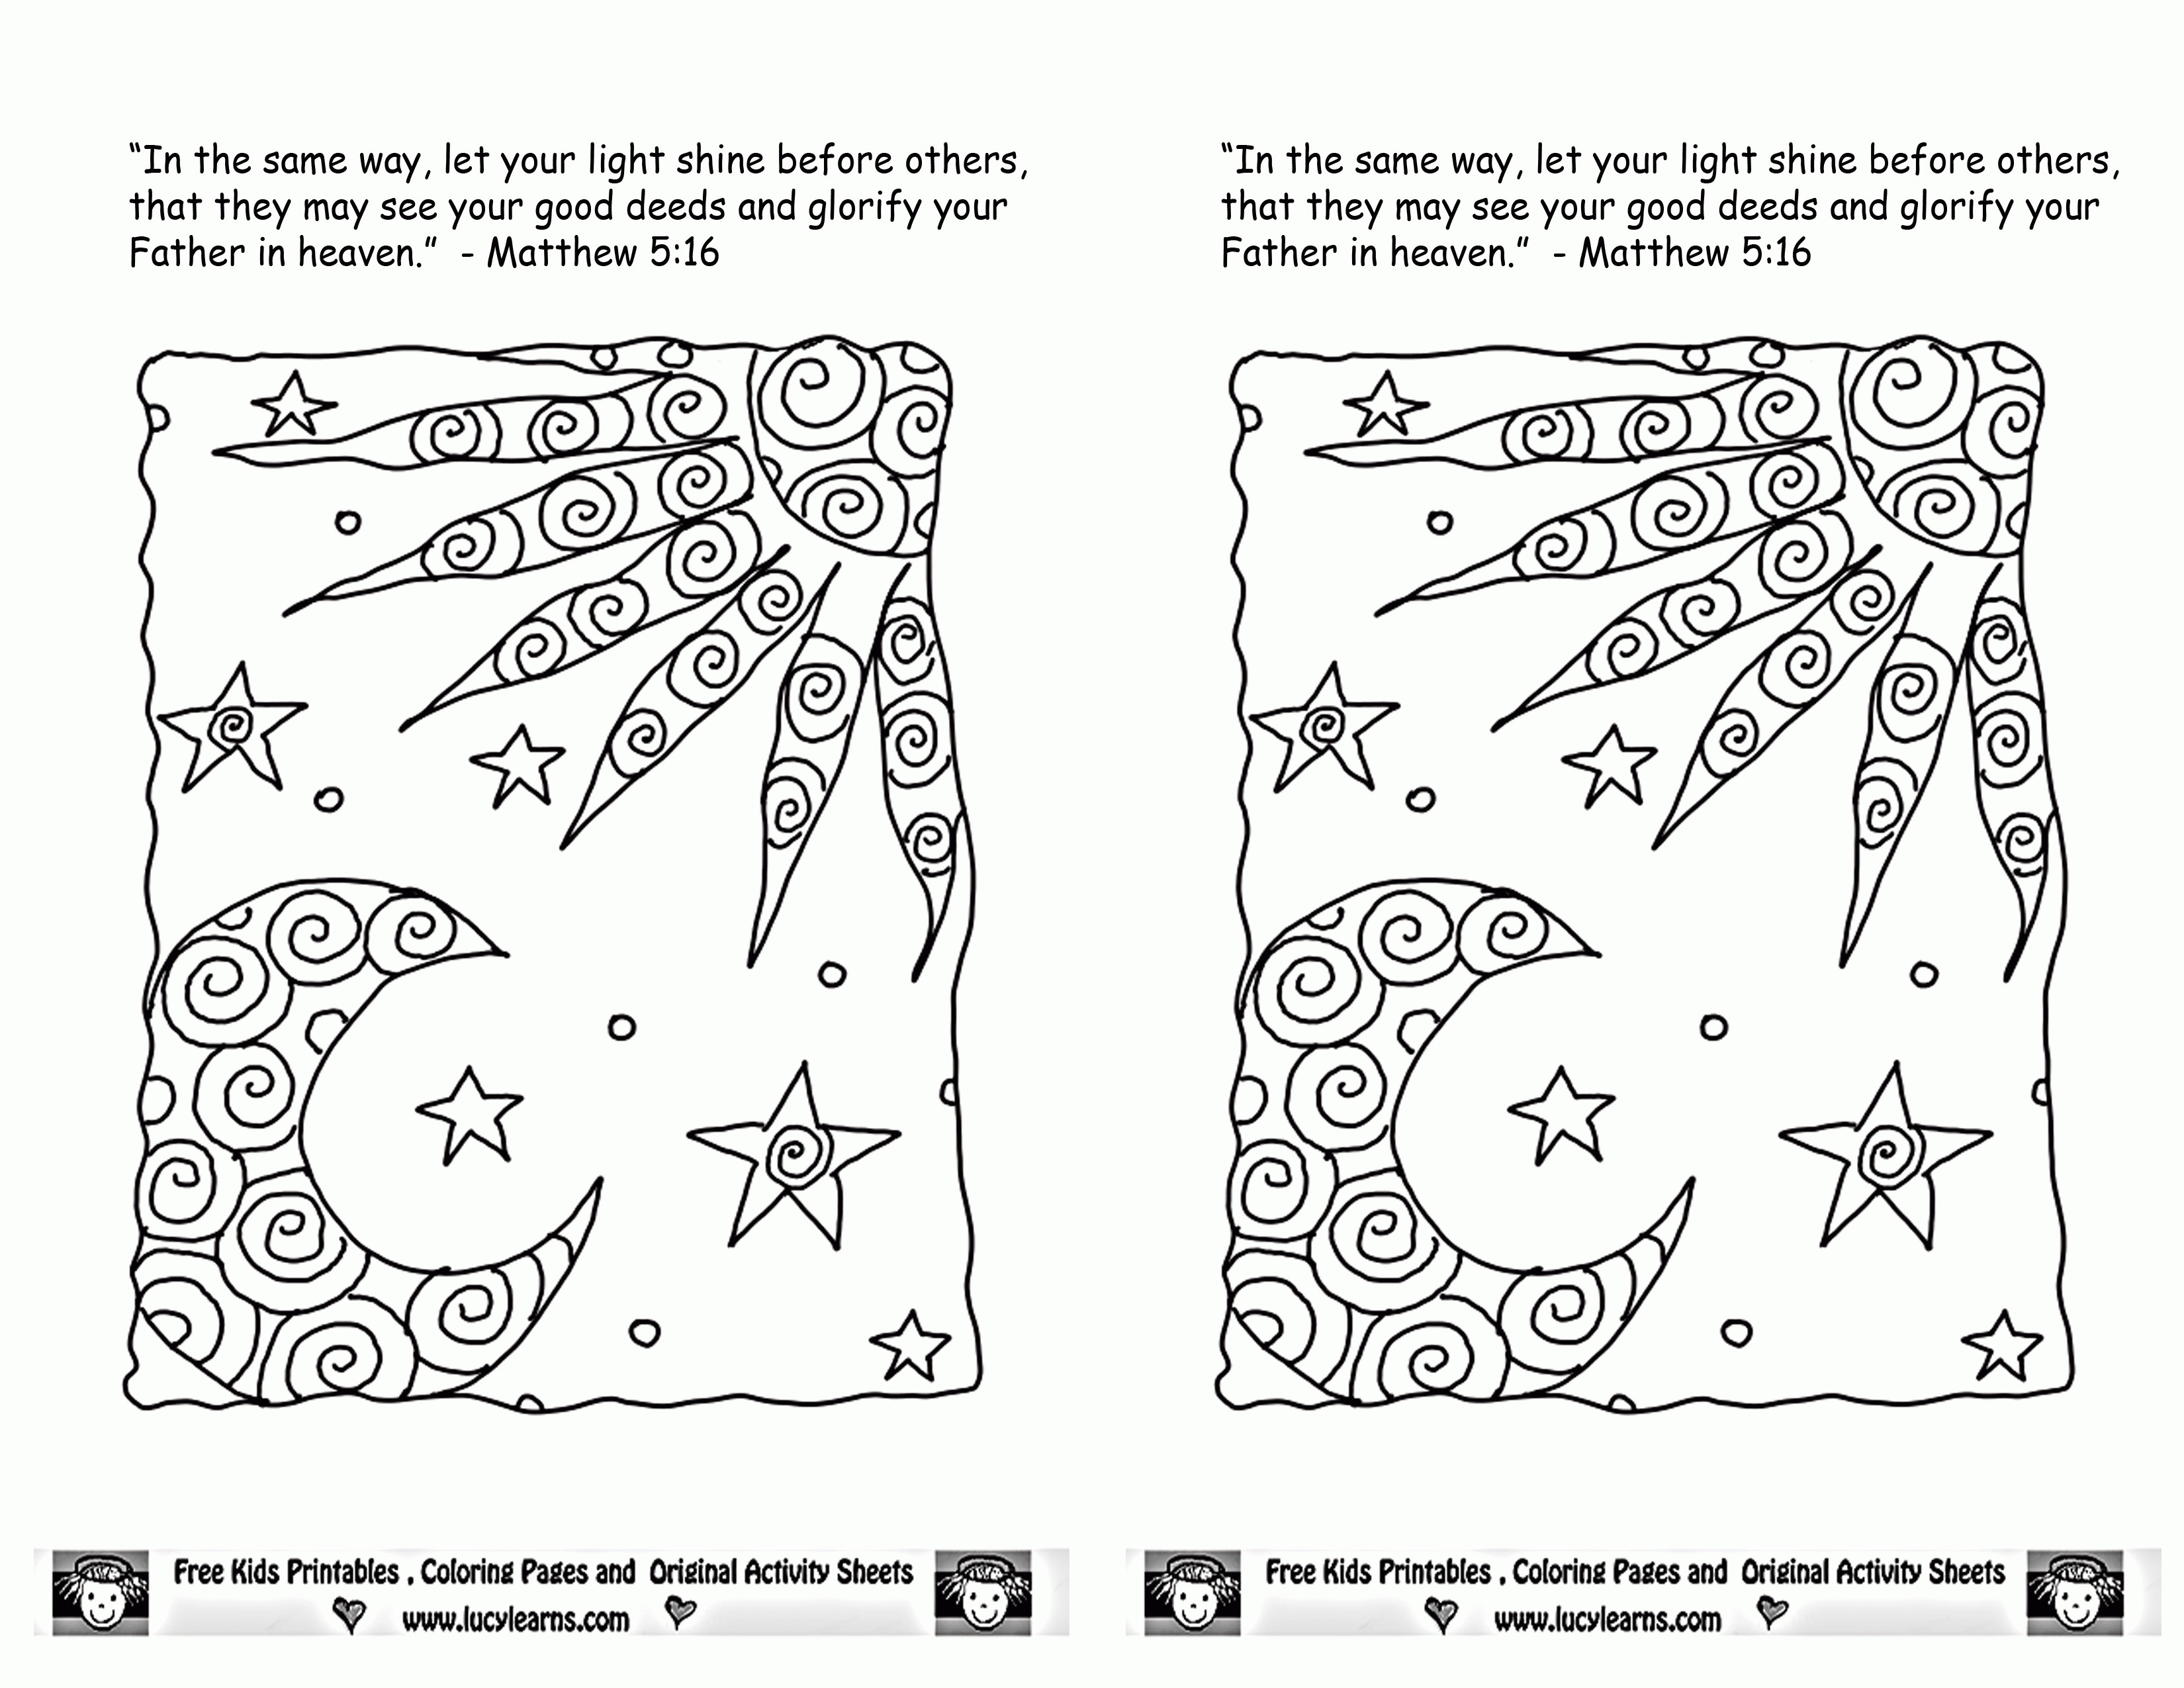 Free Printable Coloring Sheets Of Shine For Jesus Pumpkin
 Let Your Light Shine